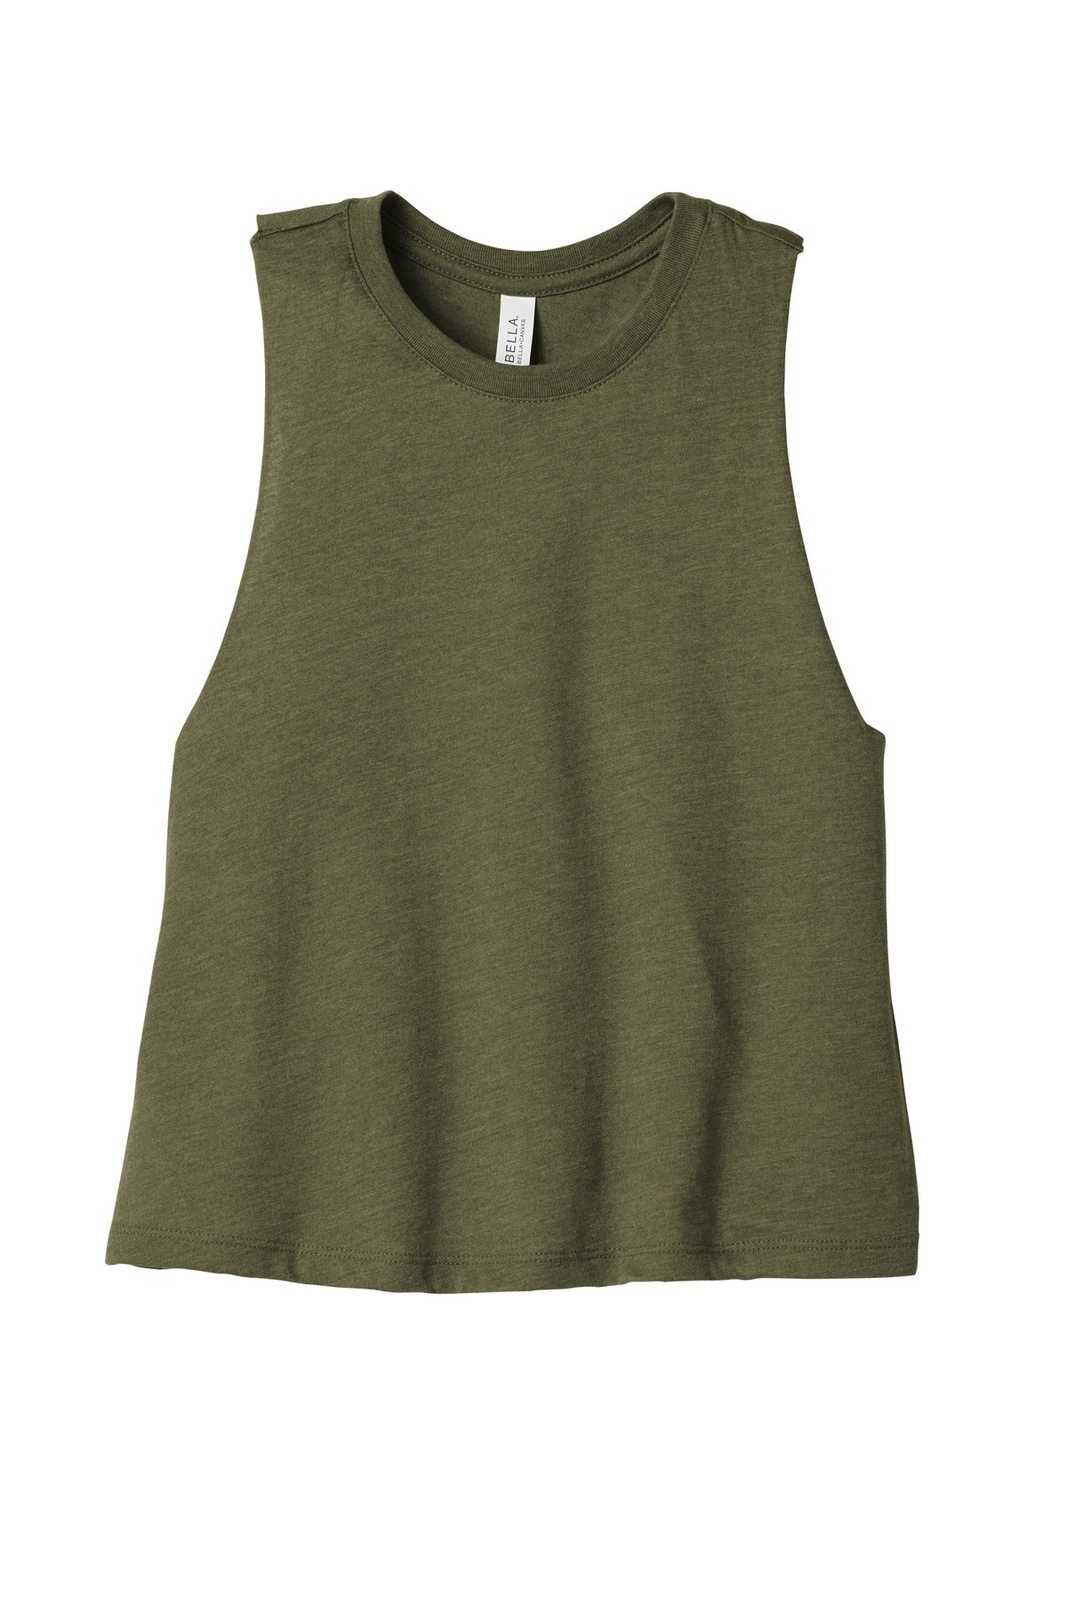 Bella + Canvas 6682 Women's Racerback Cropped Tank - Heather Olive - HIT a Double